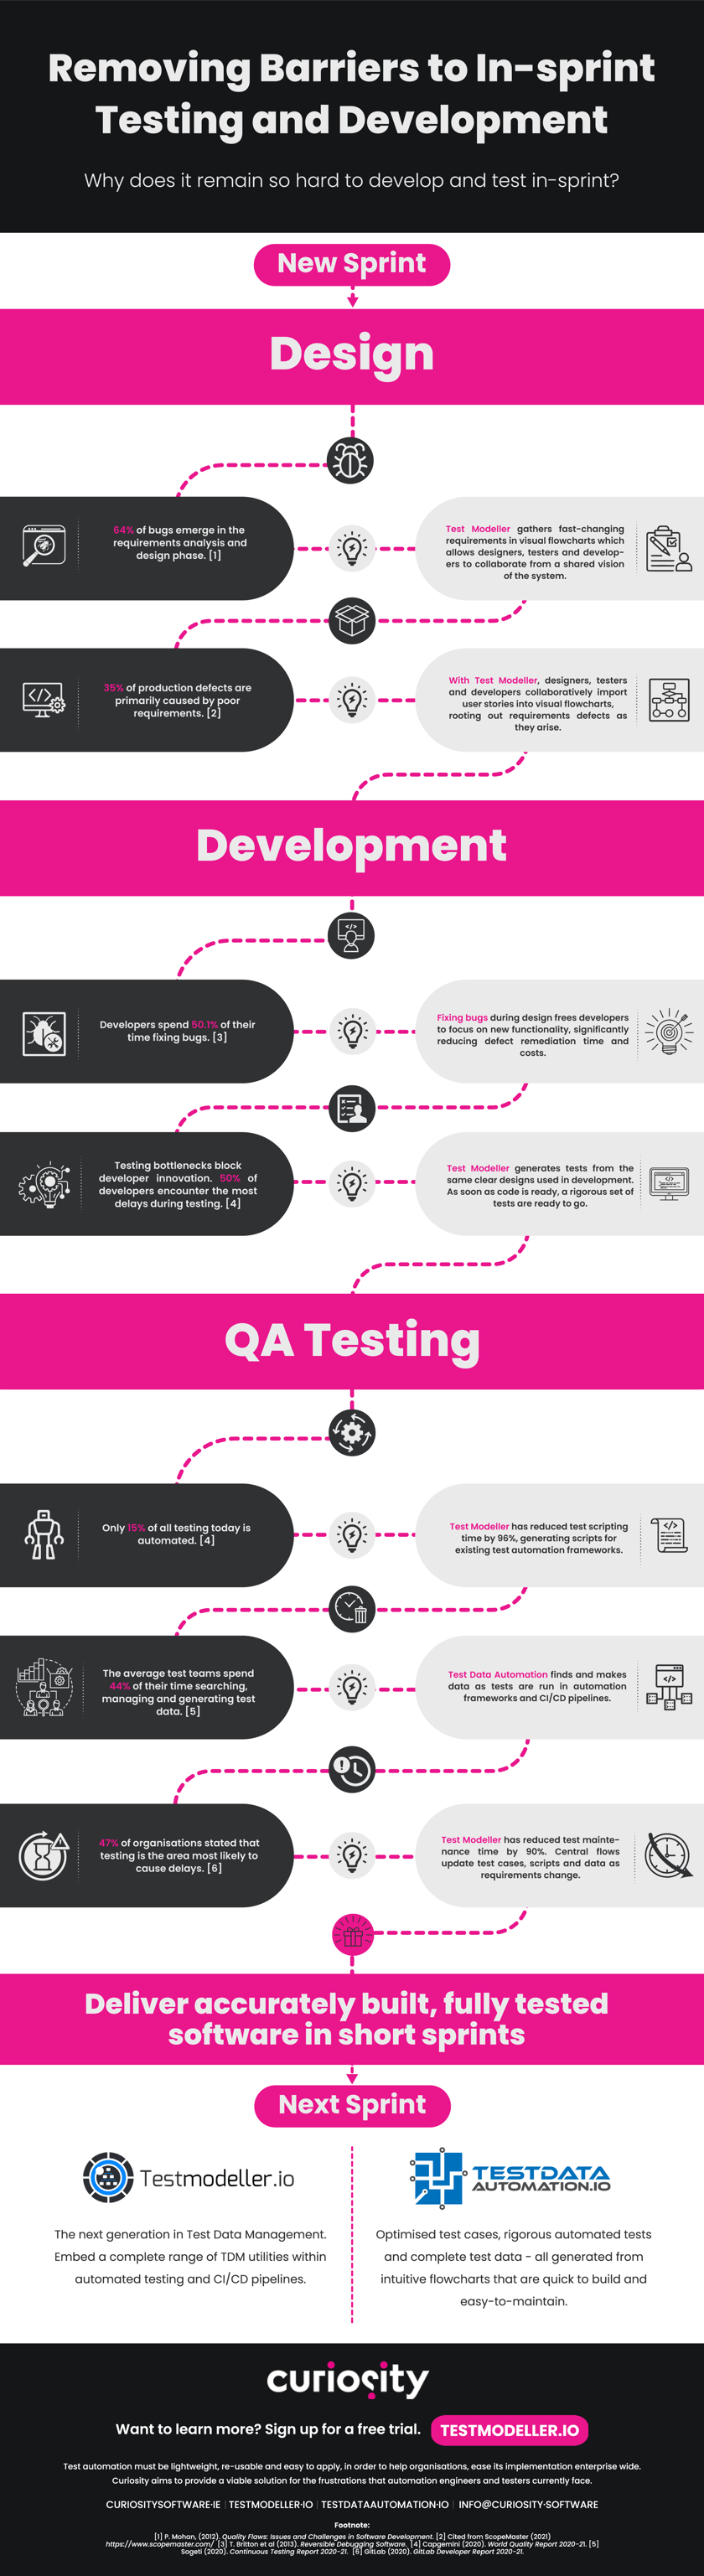 Removing Barriers to In-Sprint testing and development infographic